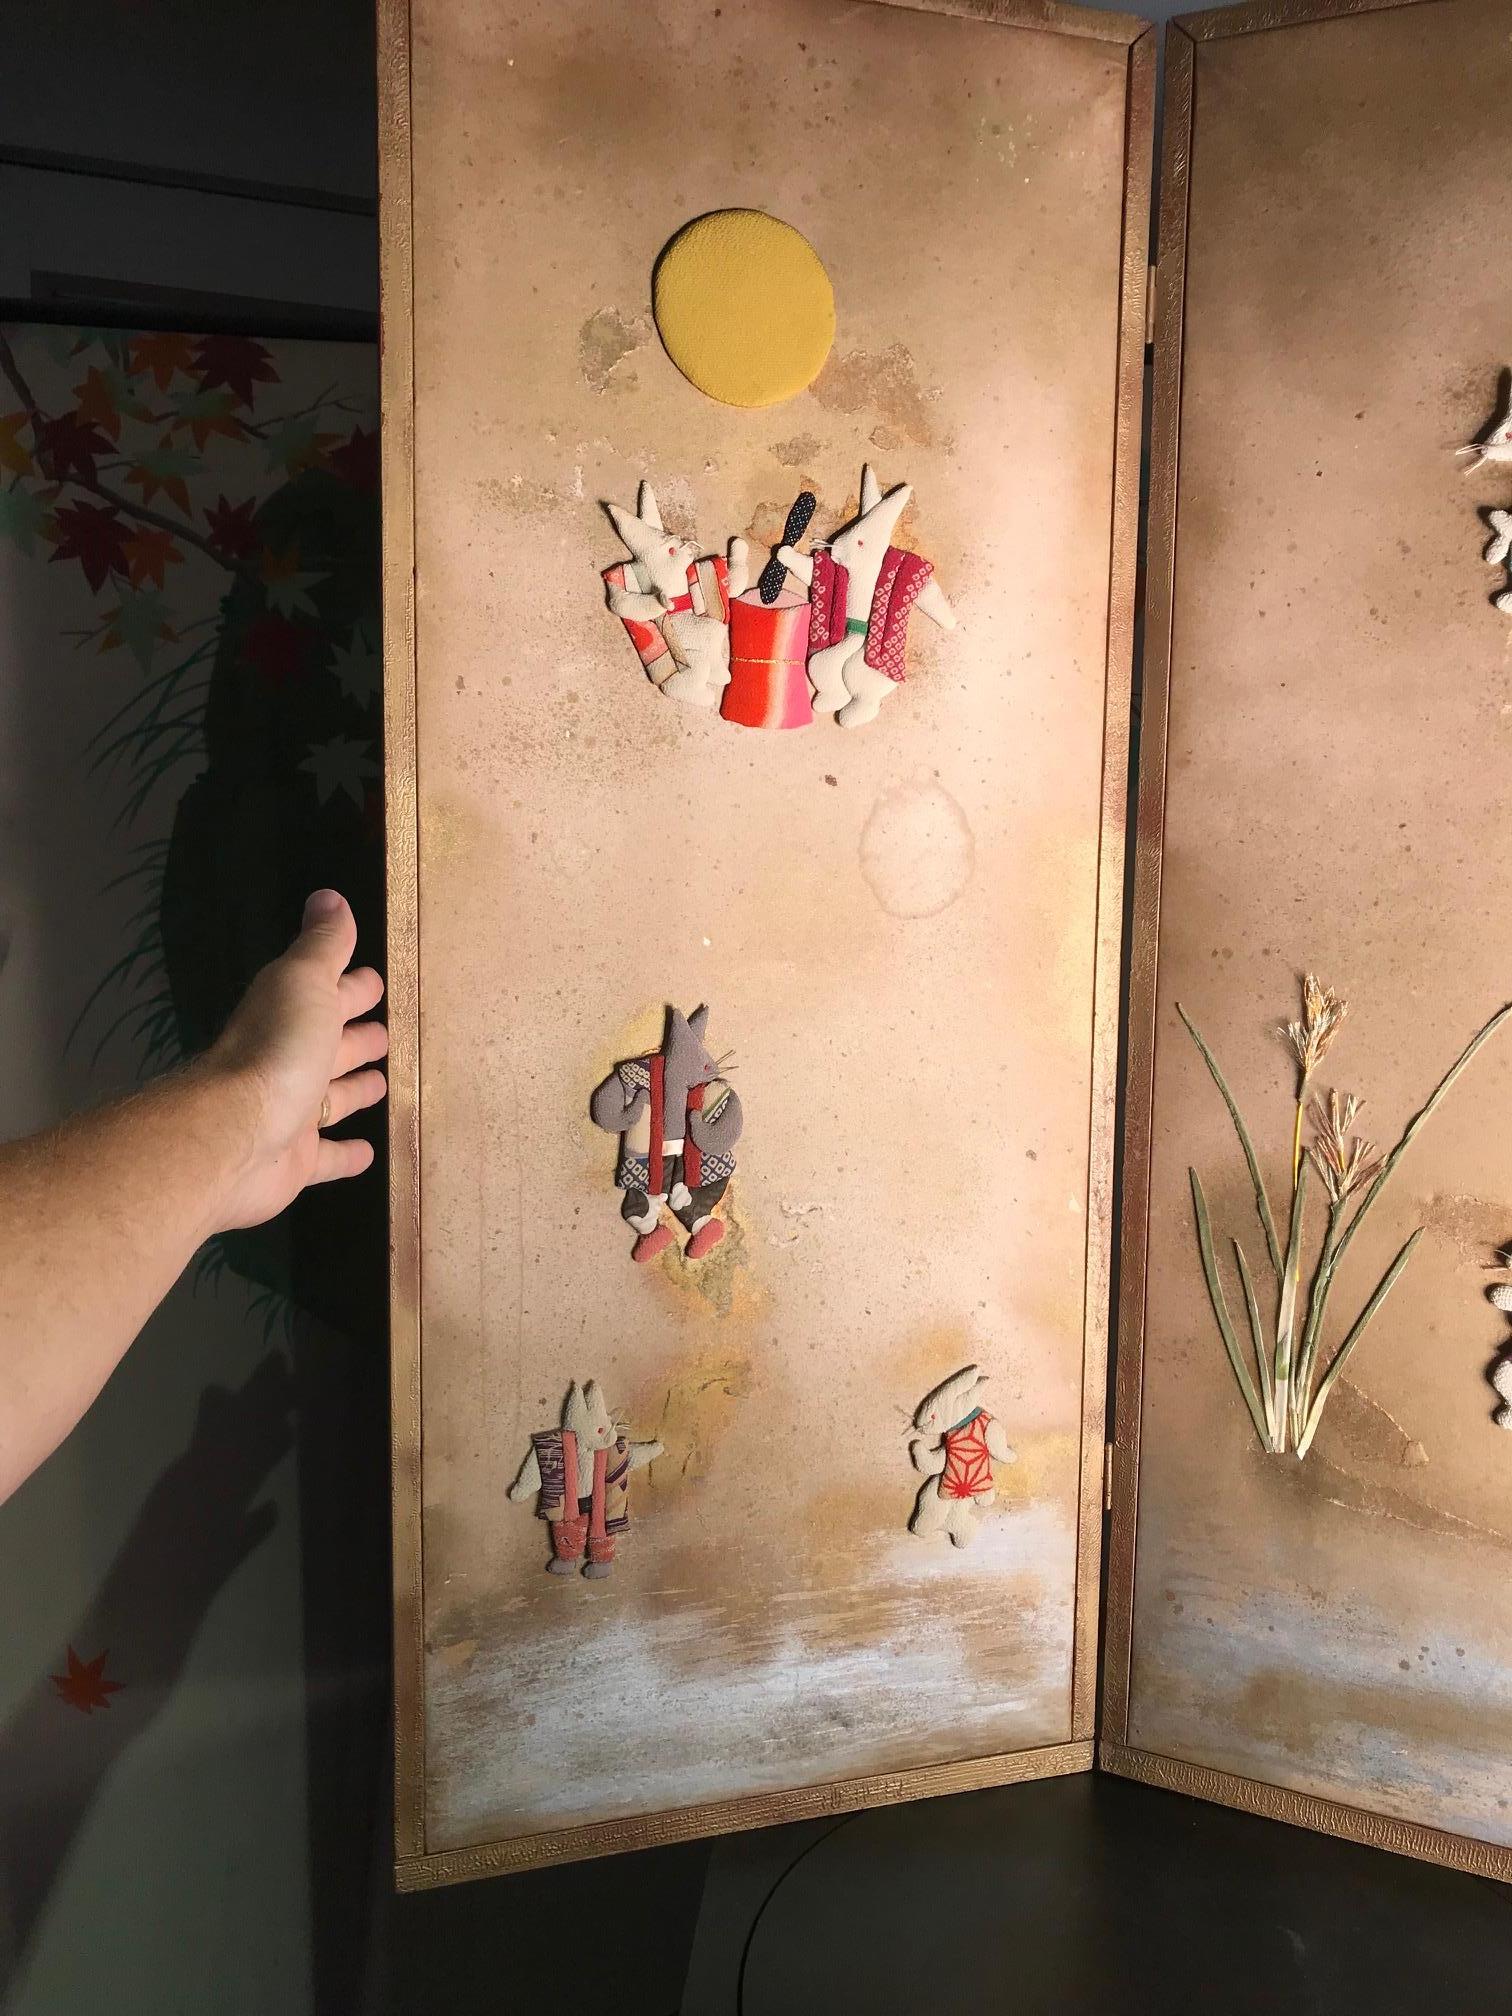 Japan, a beautiful and unusual two-panel screen Byobu with nine hand embroidered Rabbits including fantastic -moon rabbits appliqués -Shushu- applied to its cream colored paper surface and finished with a silver cloud like back ground. It has been